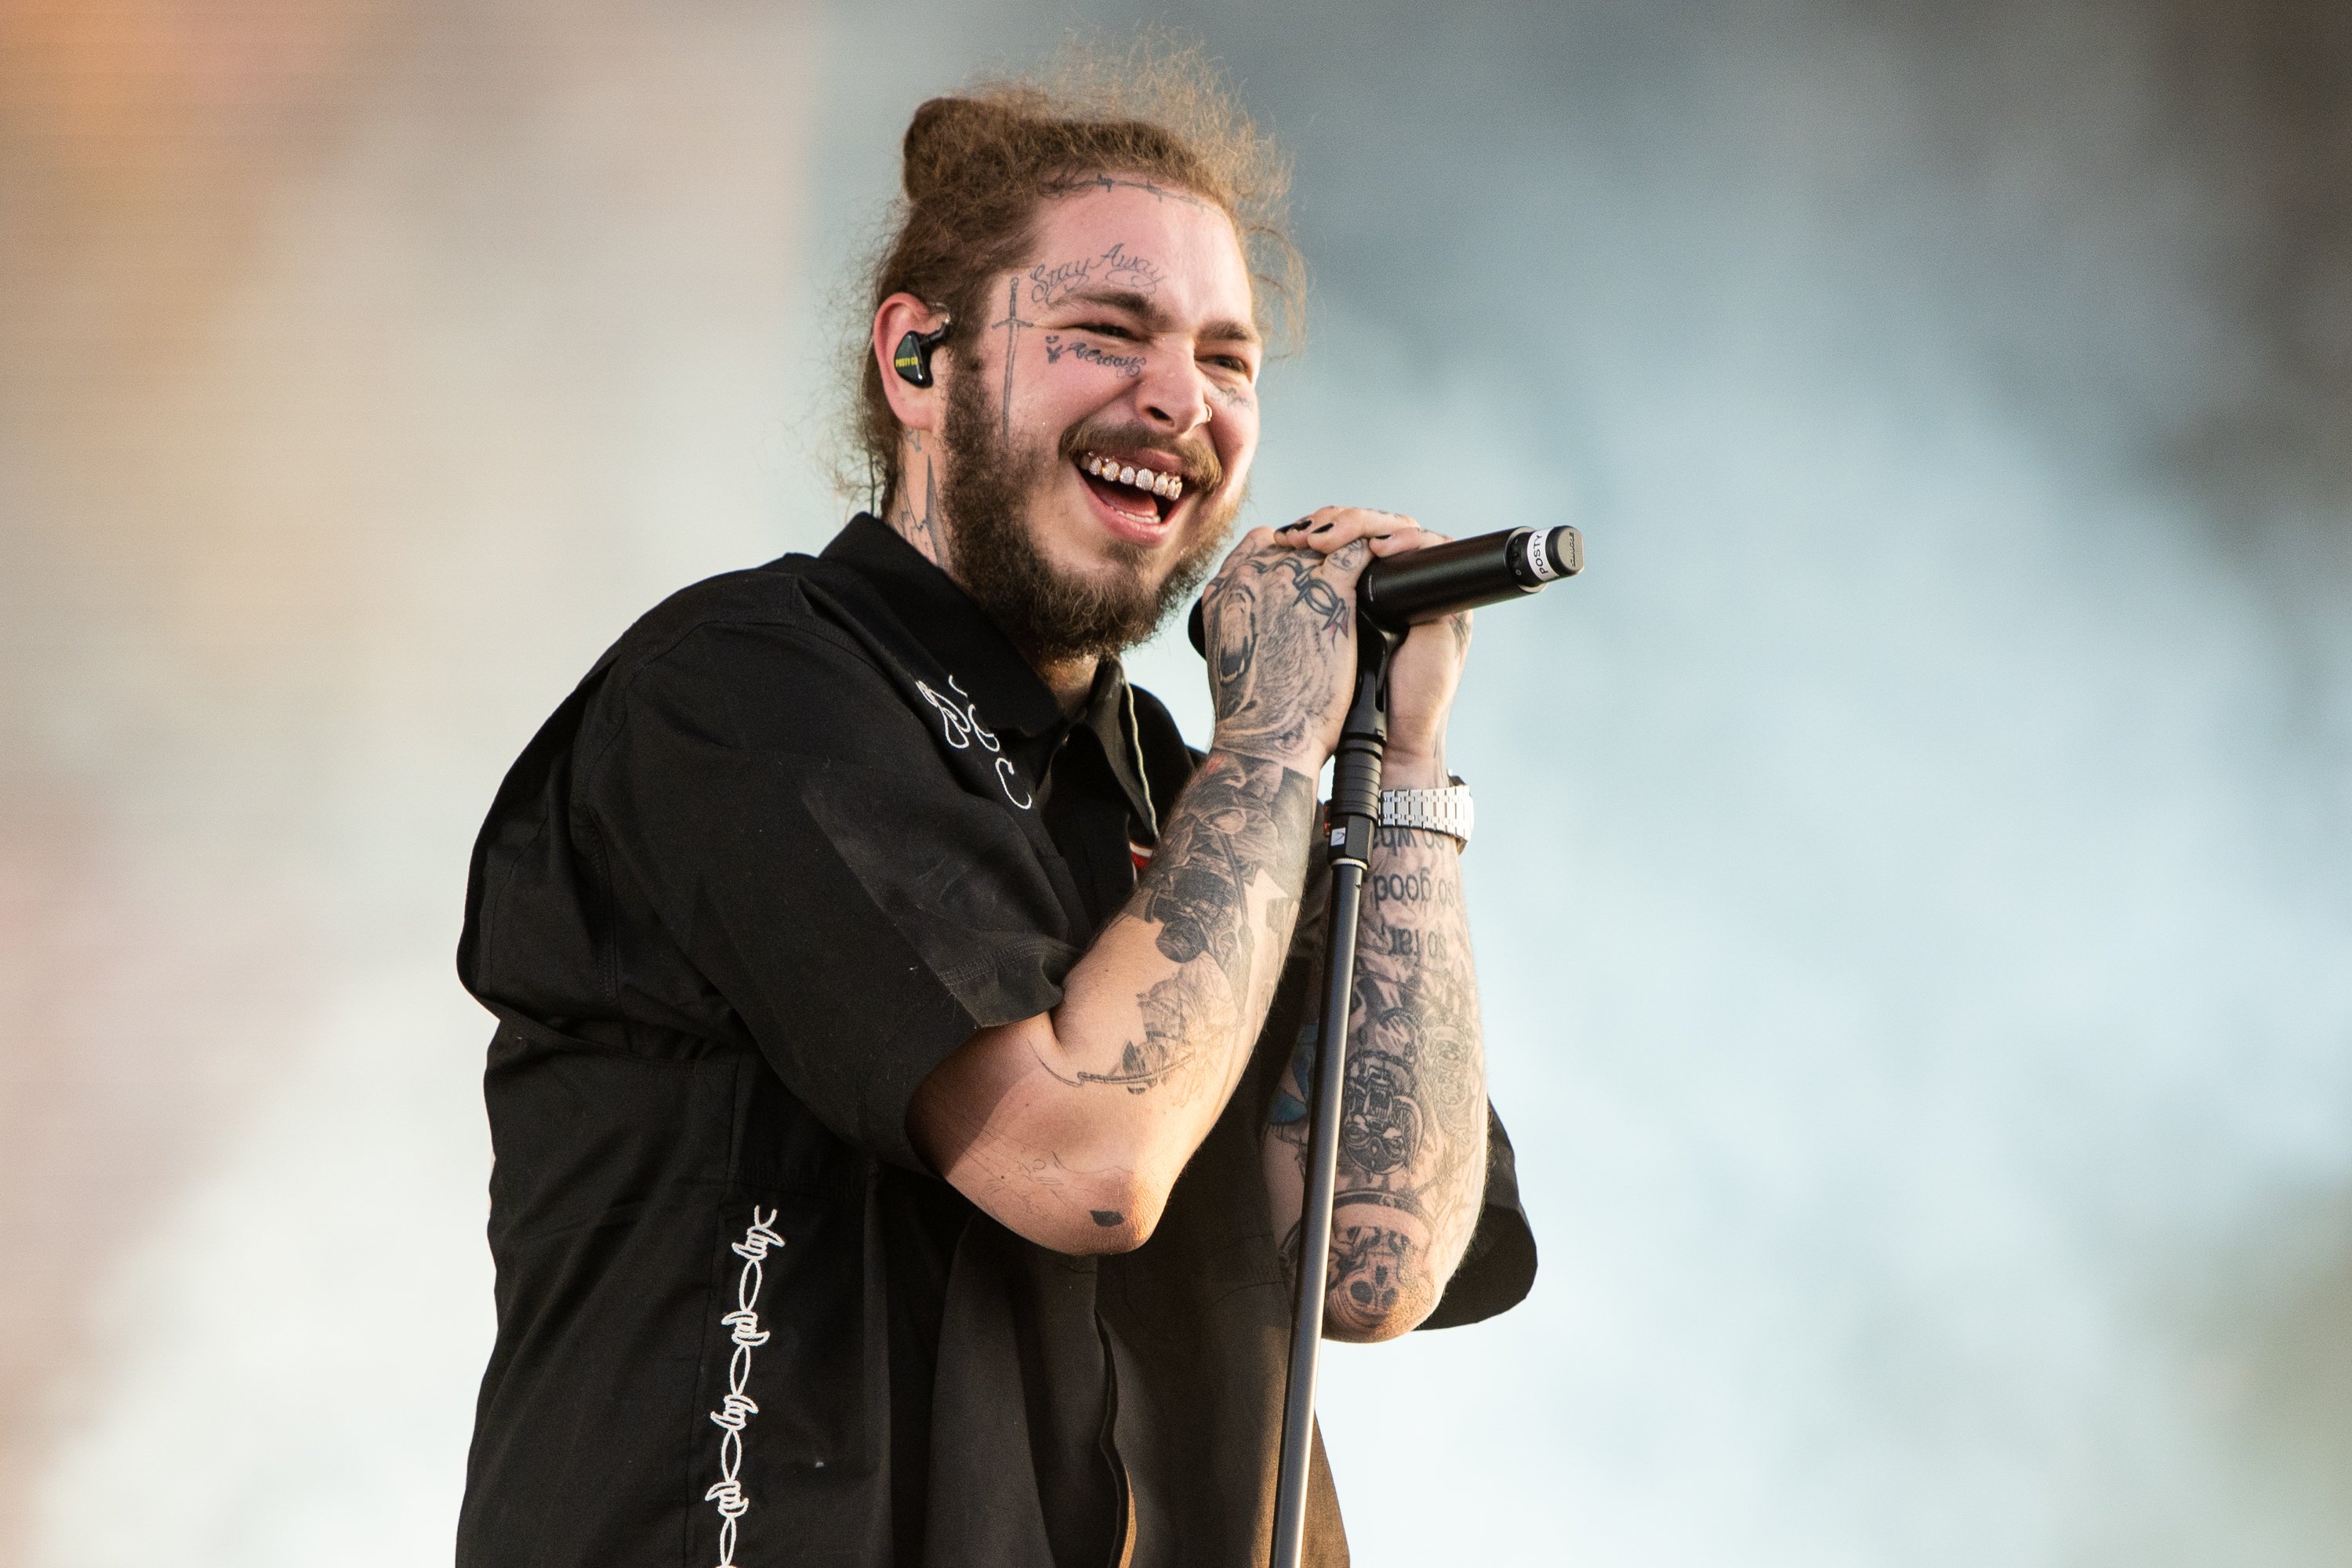 Post Malone, who recently exchanged tattoos with The Kid Laroi, performing wearing a black shirt against a white background